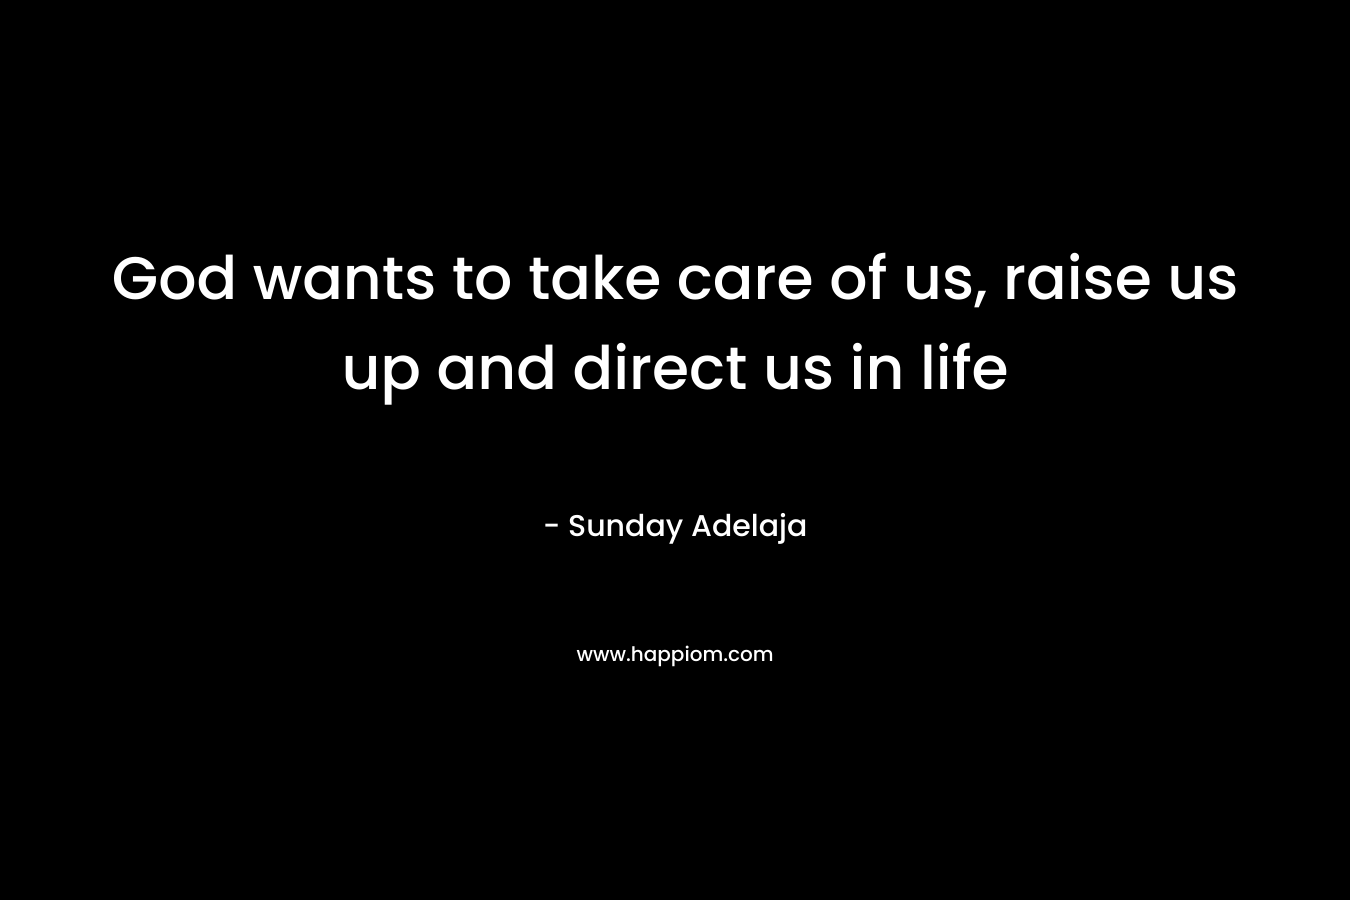 God wants to take care of us, raise us up and direct us in life